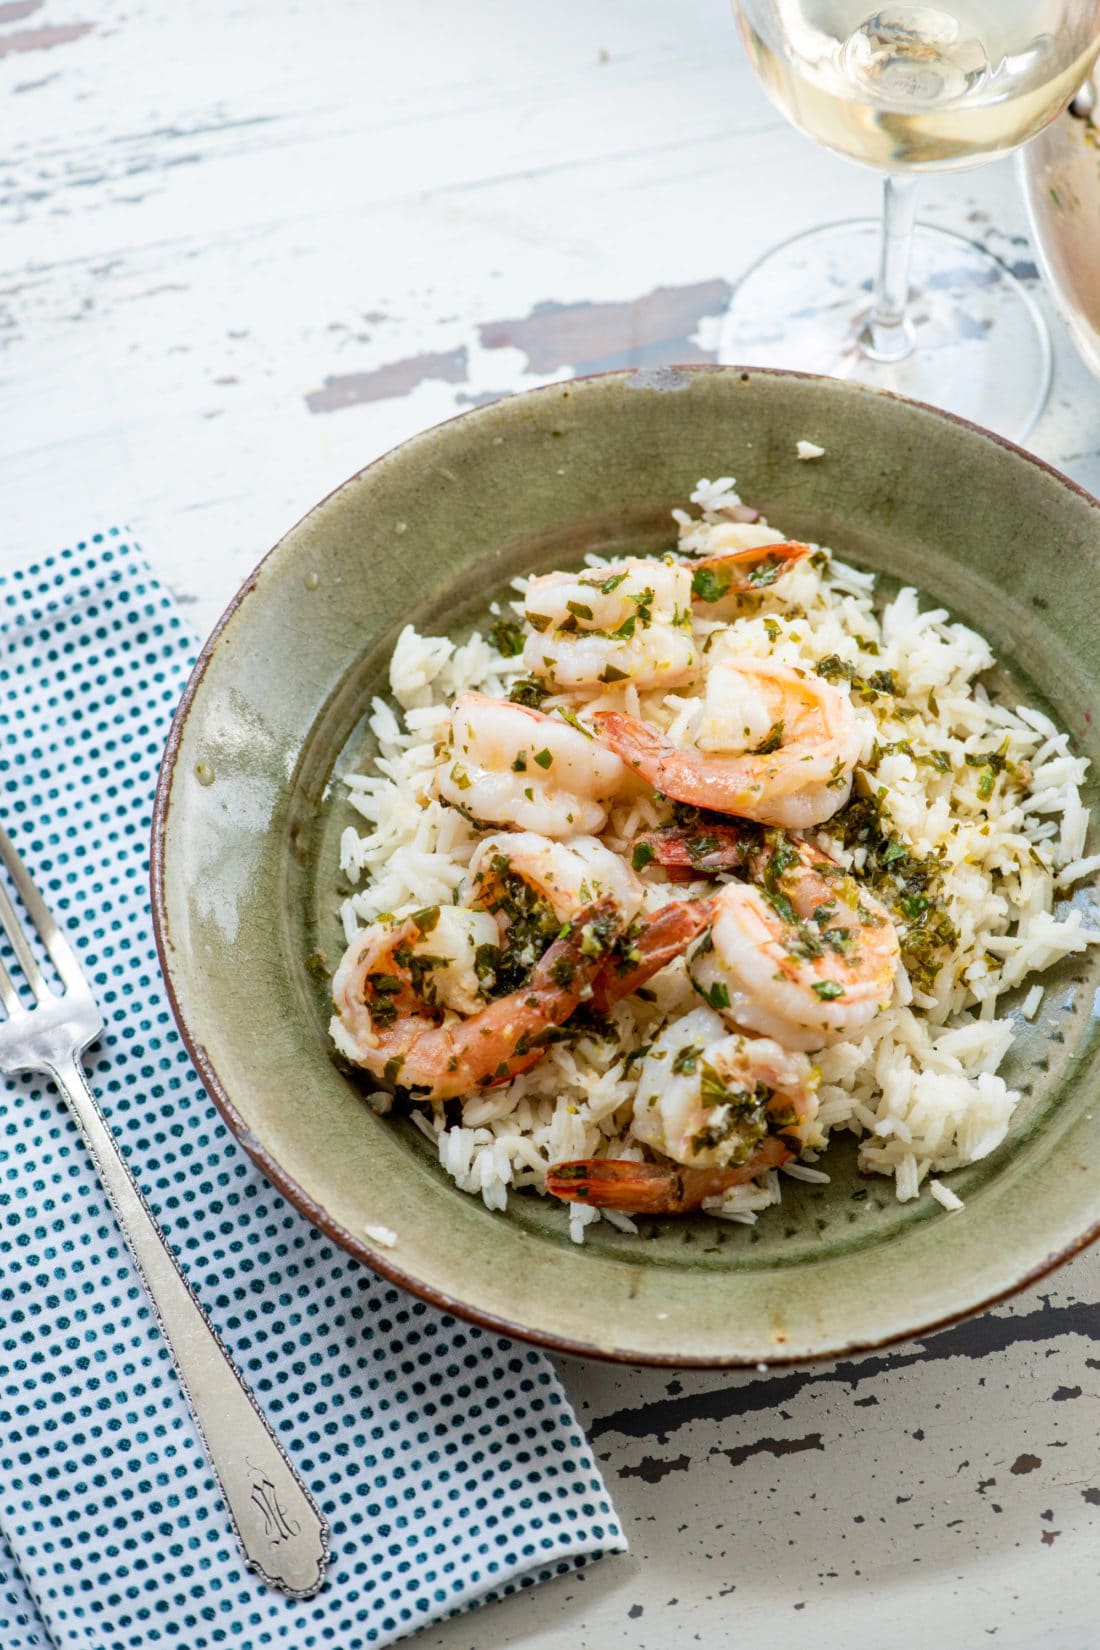 Plate of Spicy Lemon Shrimp Over Rice.